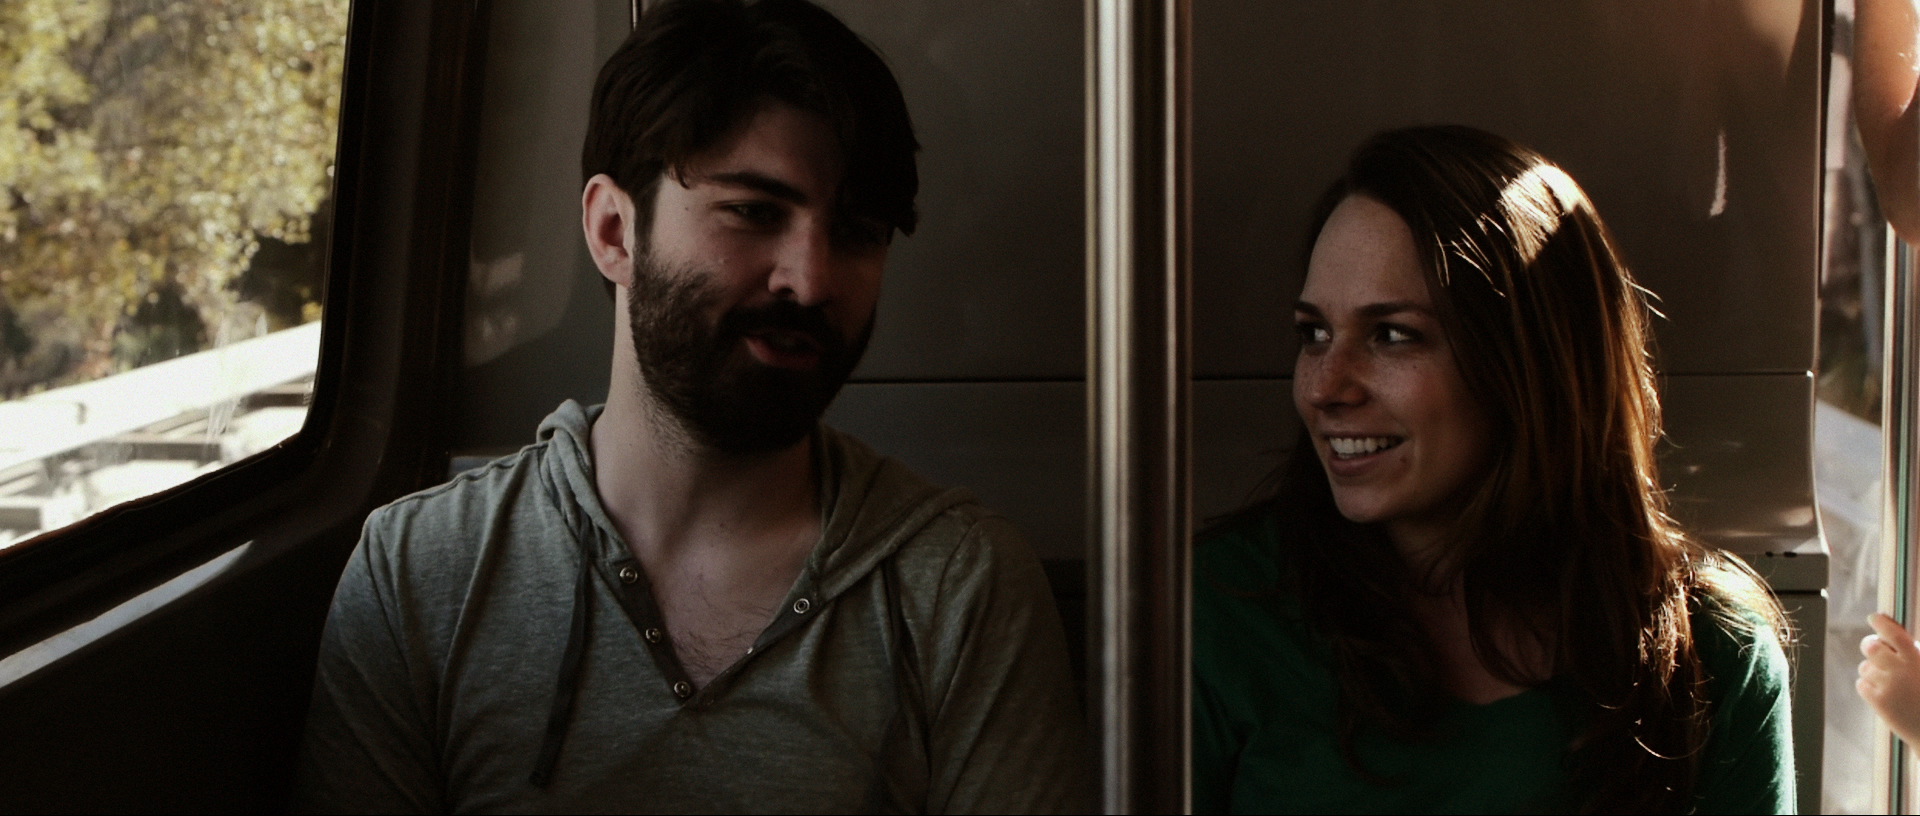 Mike Matola and Kate Murdoch in Look Closer (2013)